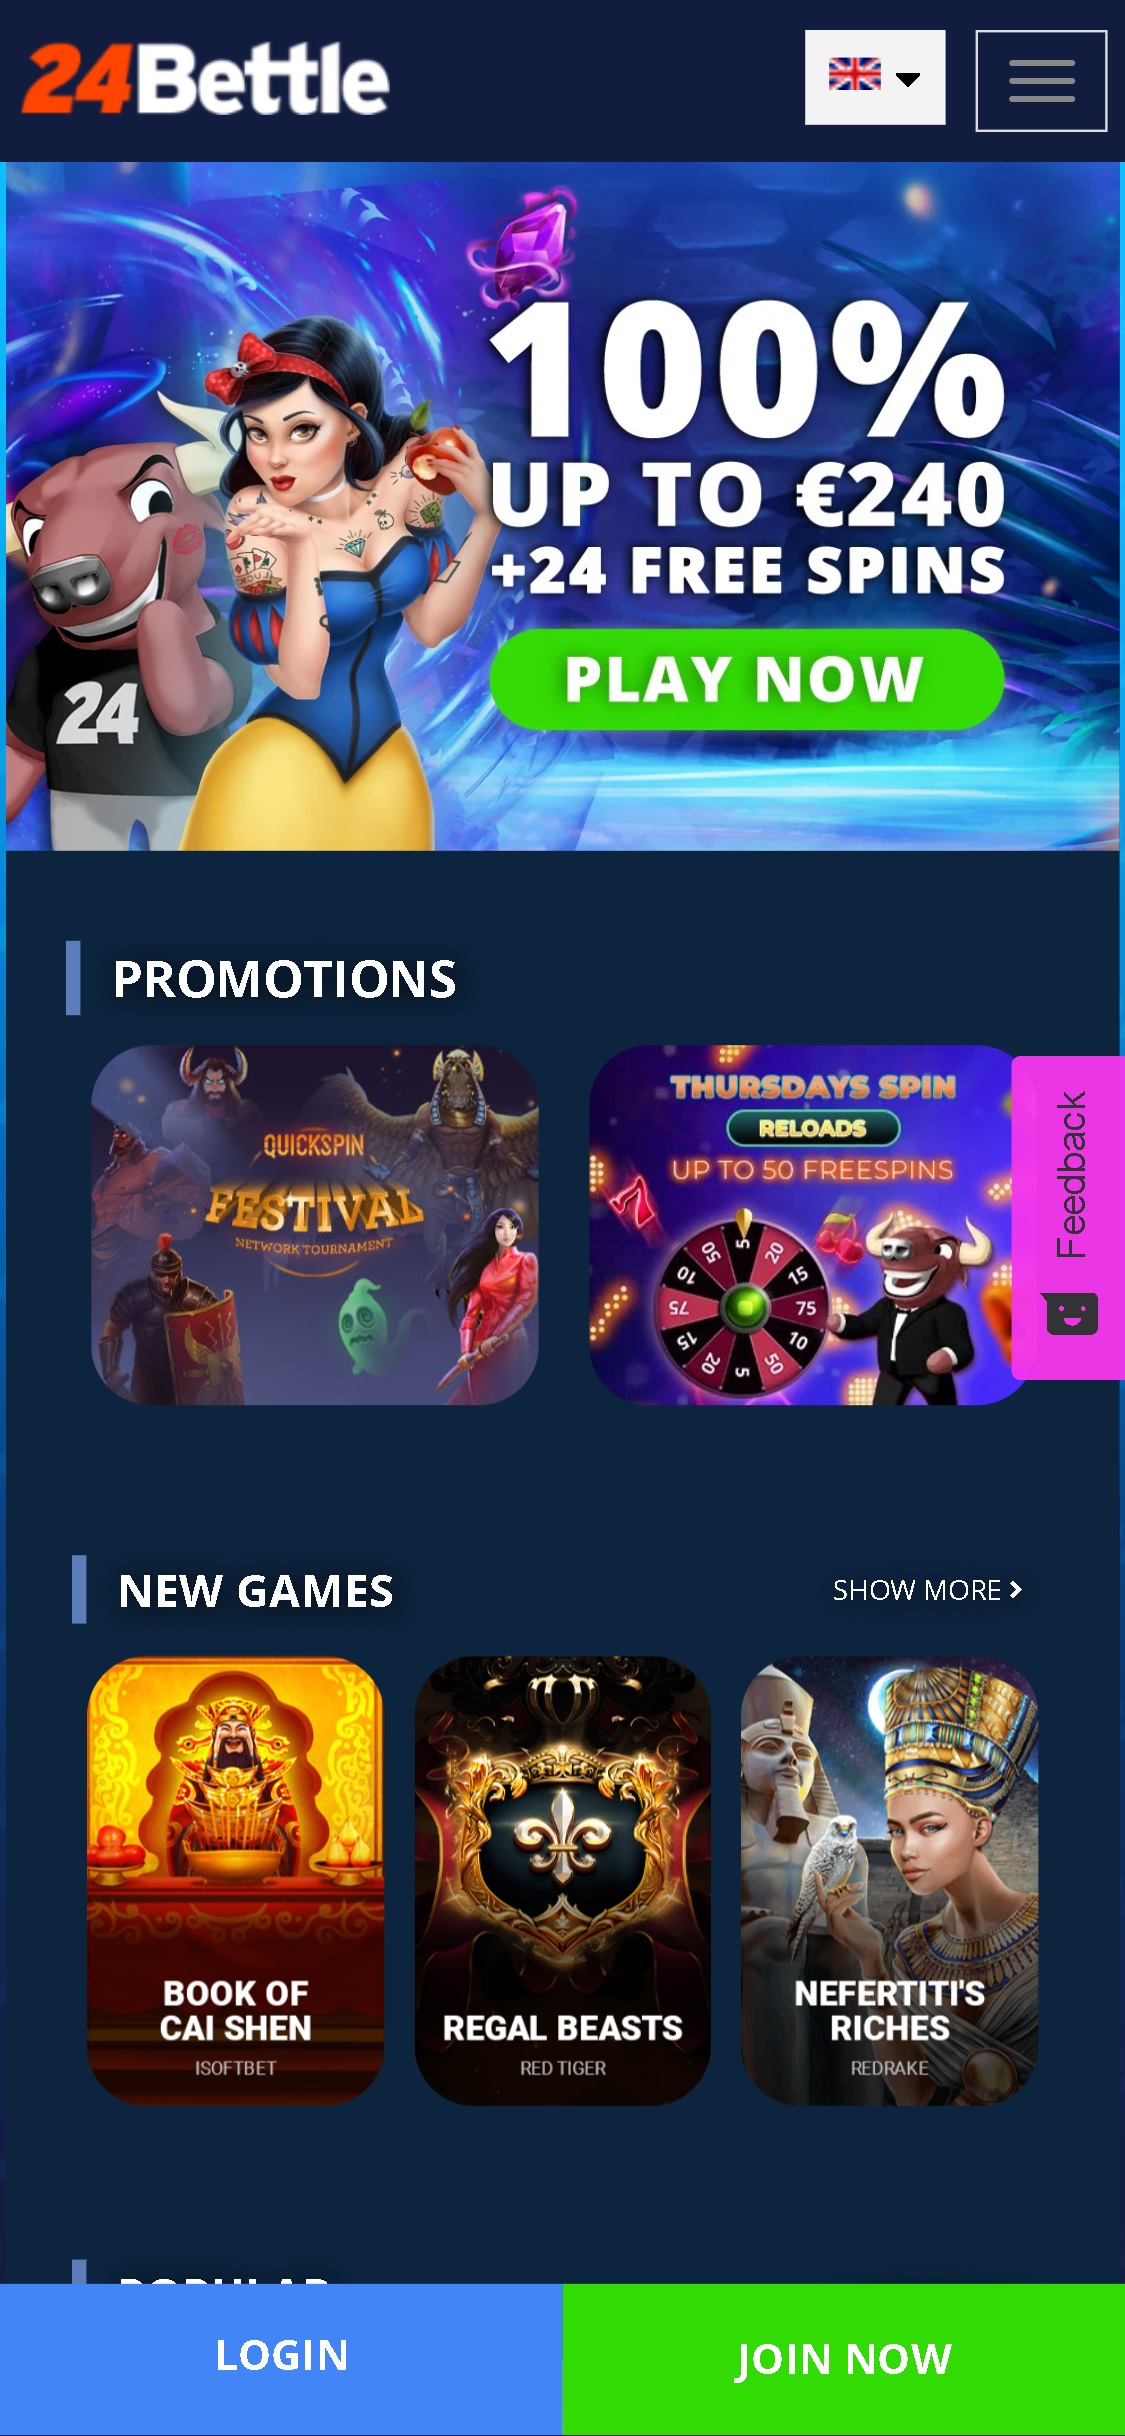 24 Bettle Casino Mobile Review